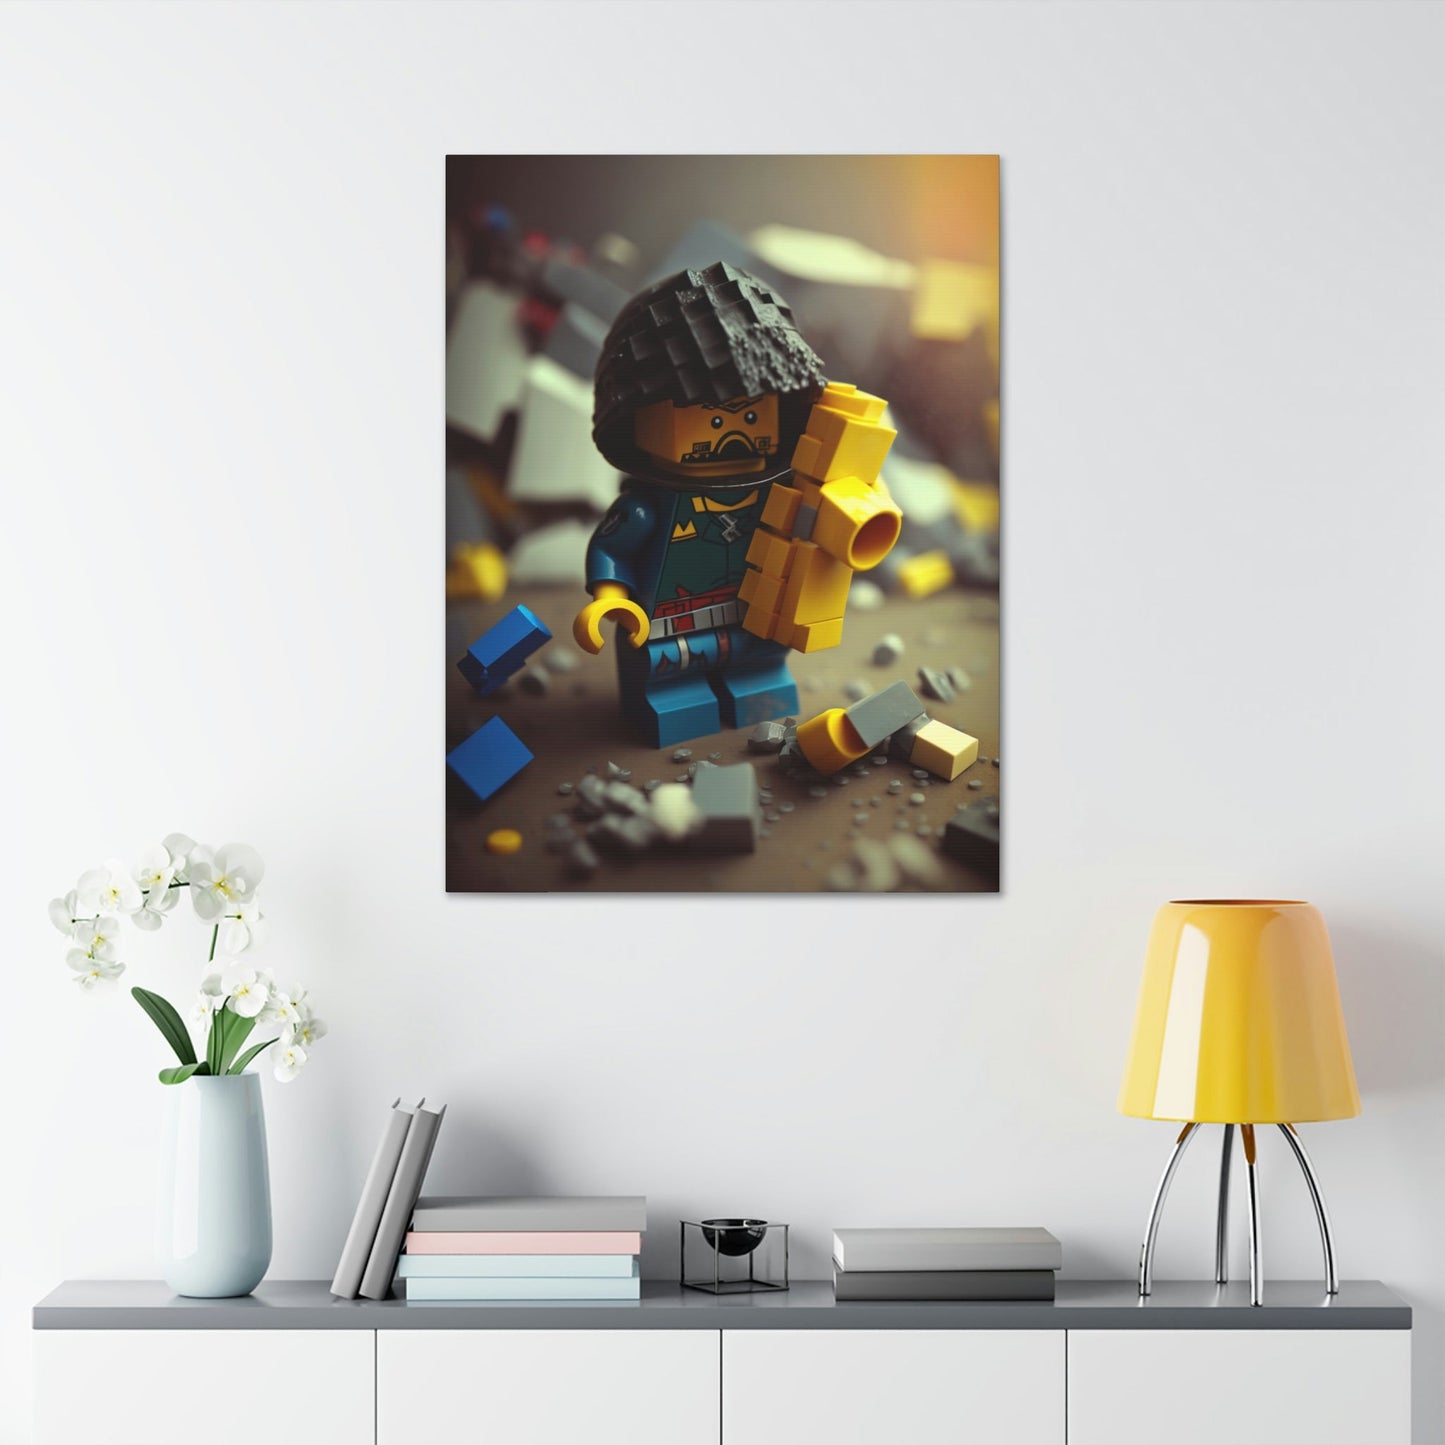 Creative Construction: Framed Canvas and Print of Lego Sculptures